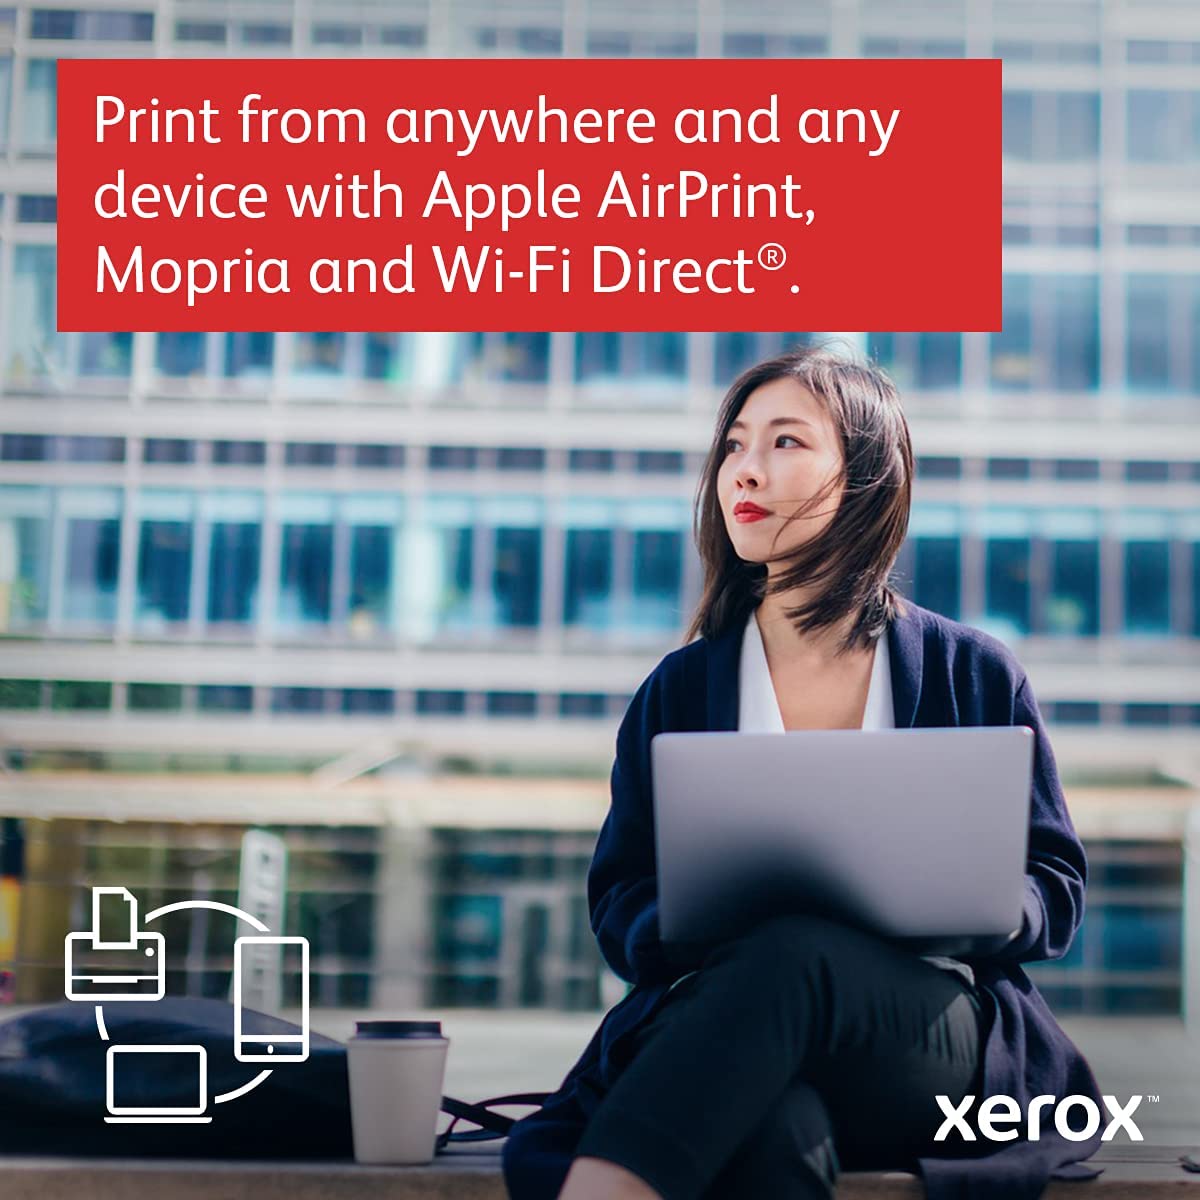 Xerox B225/DNI Multifunction Printer, Print/Scan/Copy, Black and White Laser, Wireless, All in One